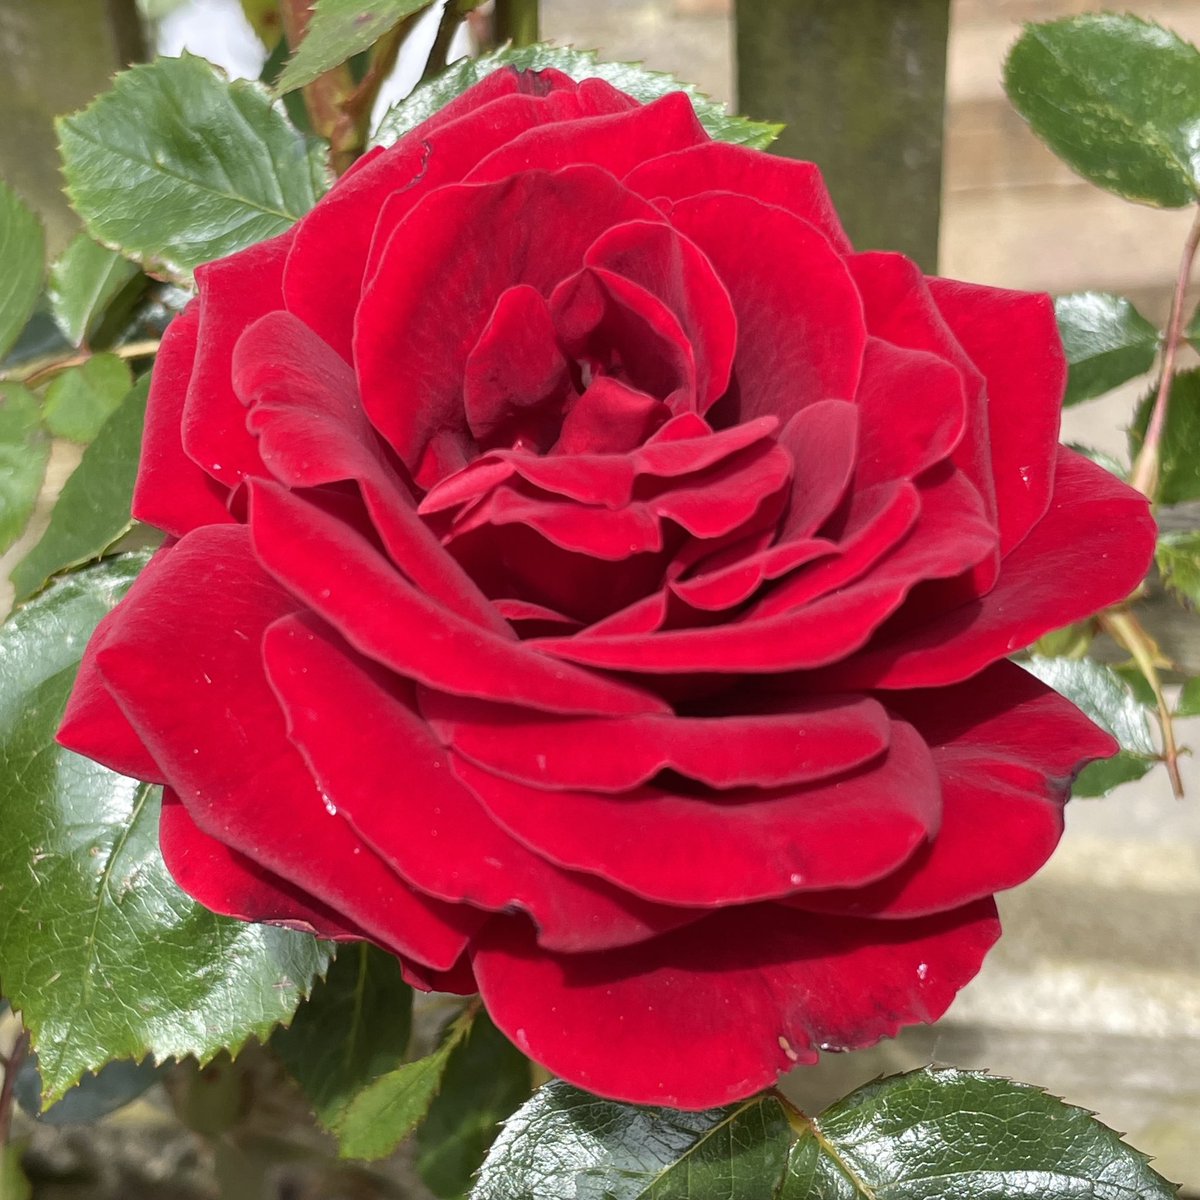 At last! A rose in full bloom on my Devon garden . First of the year. #rose #RoseWednesday